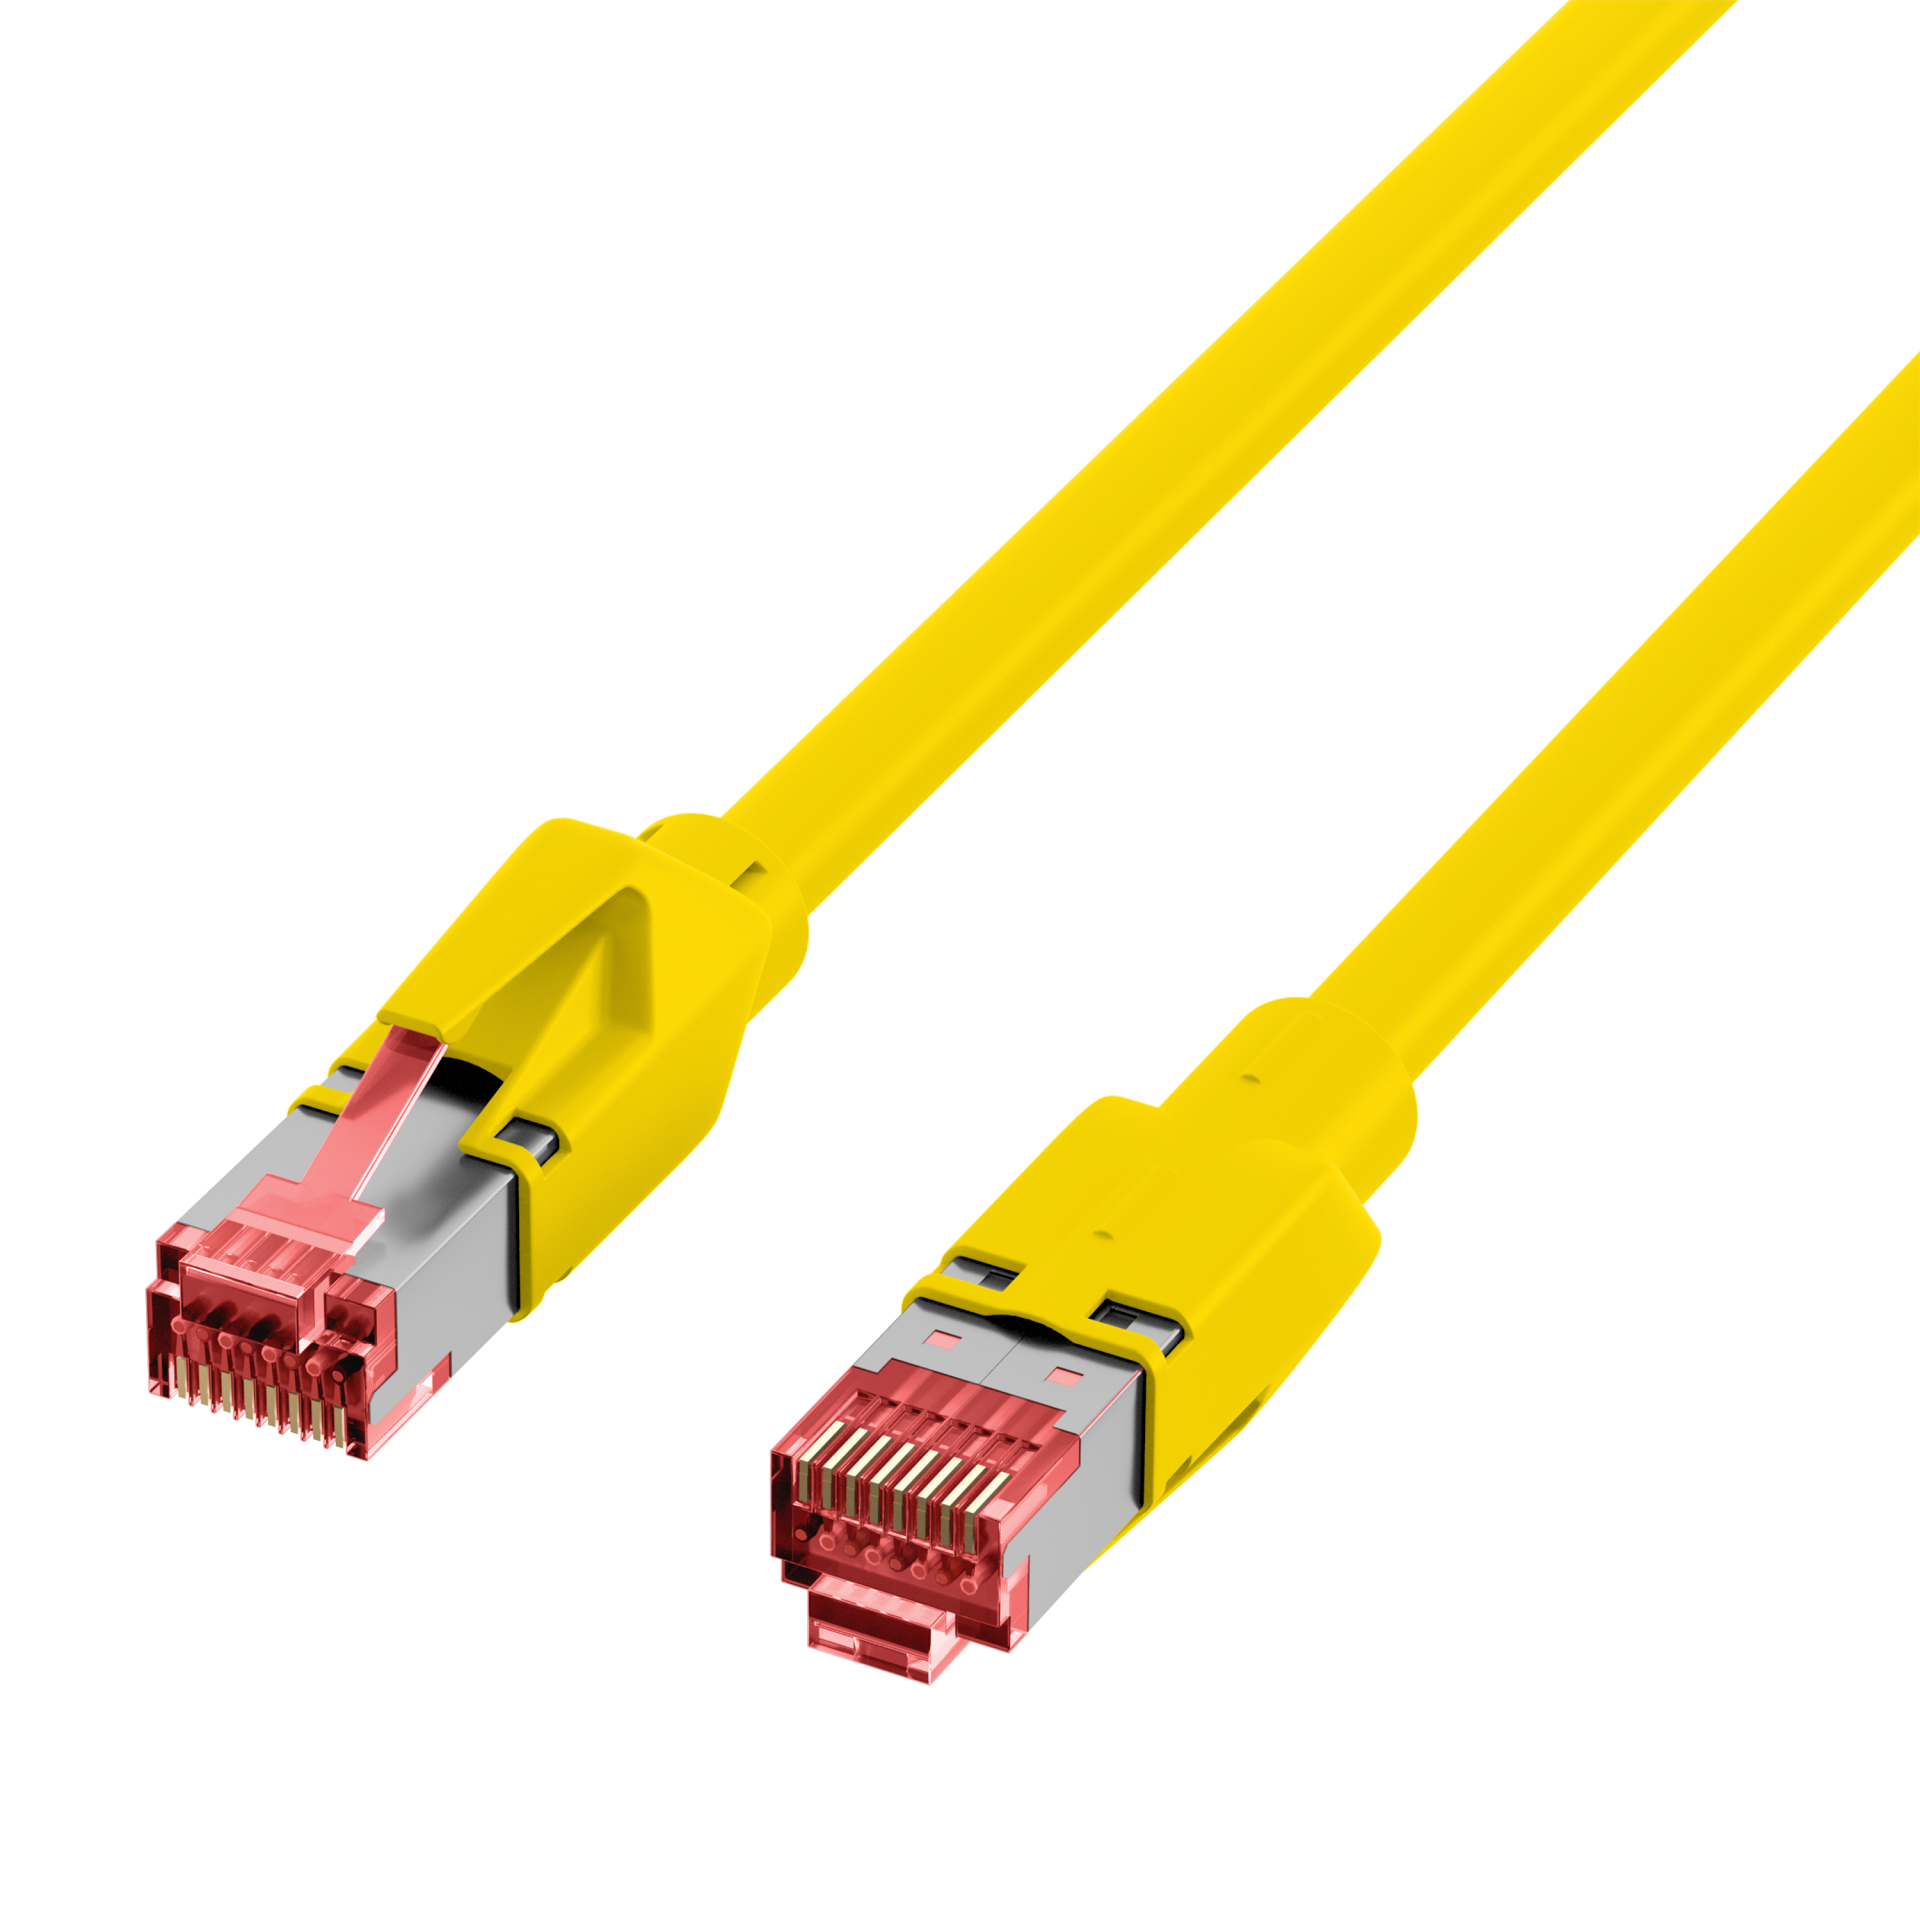 RJ45 Patch Cord Cat.5e SF/UTP PURTM21 for drag chains yellow 40m